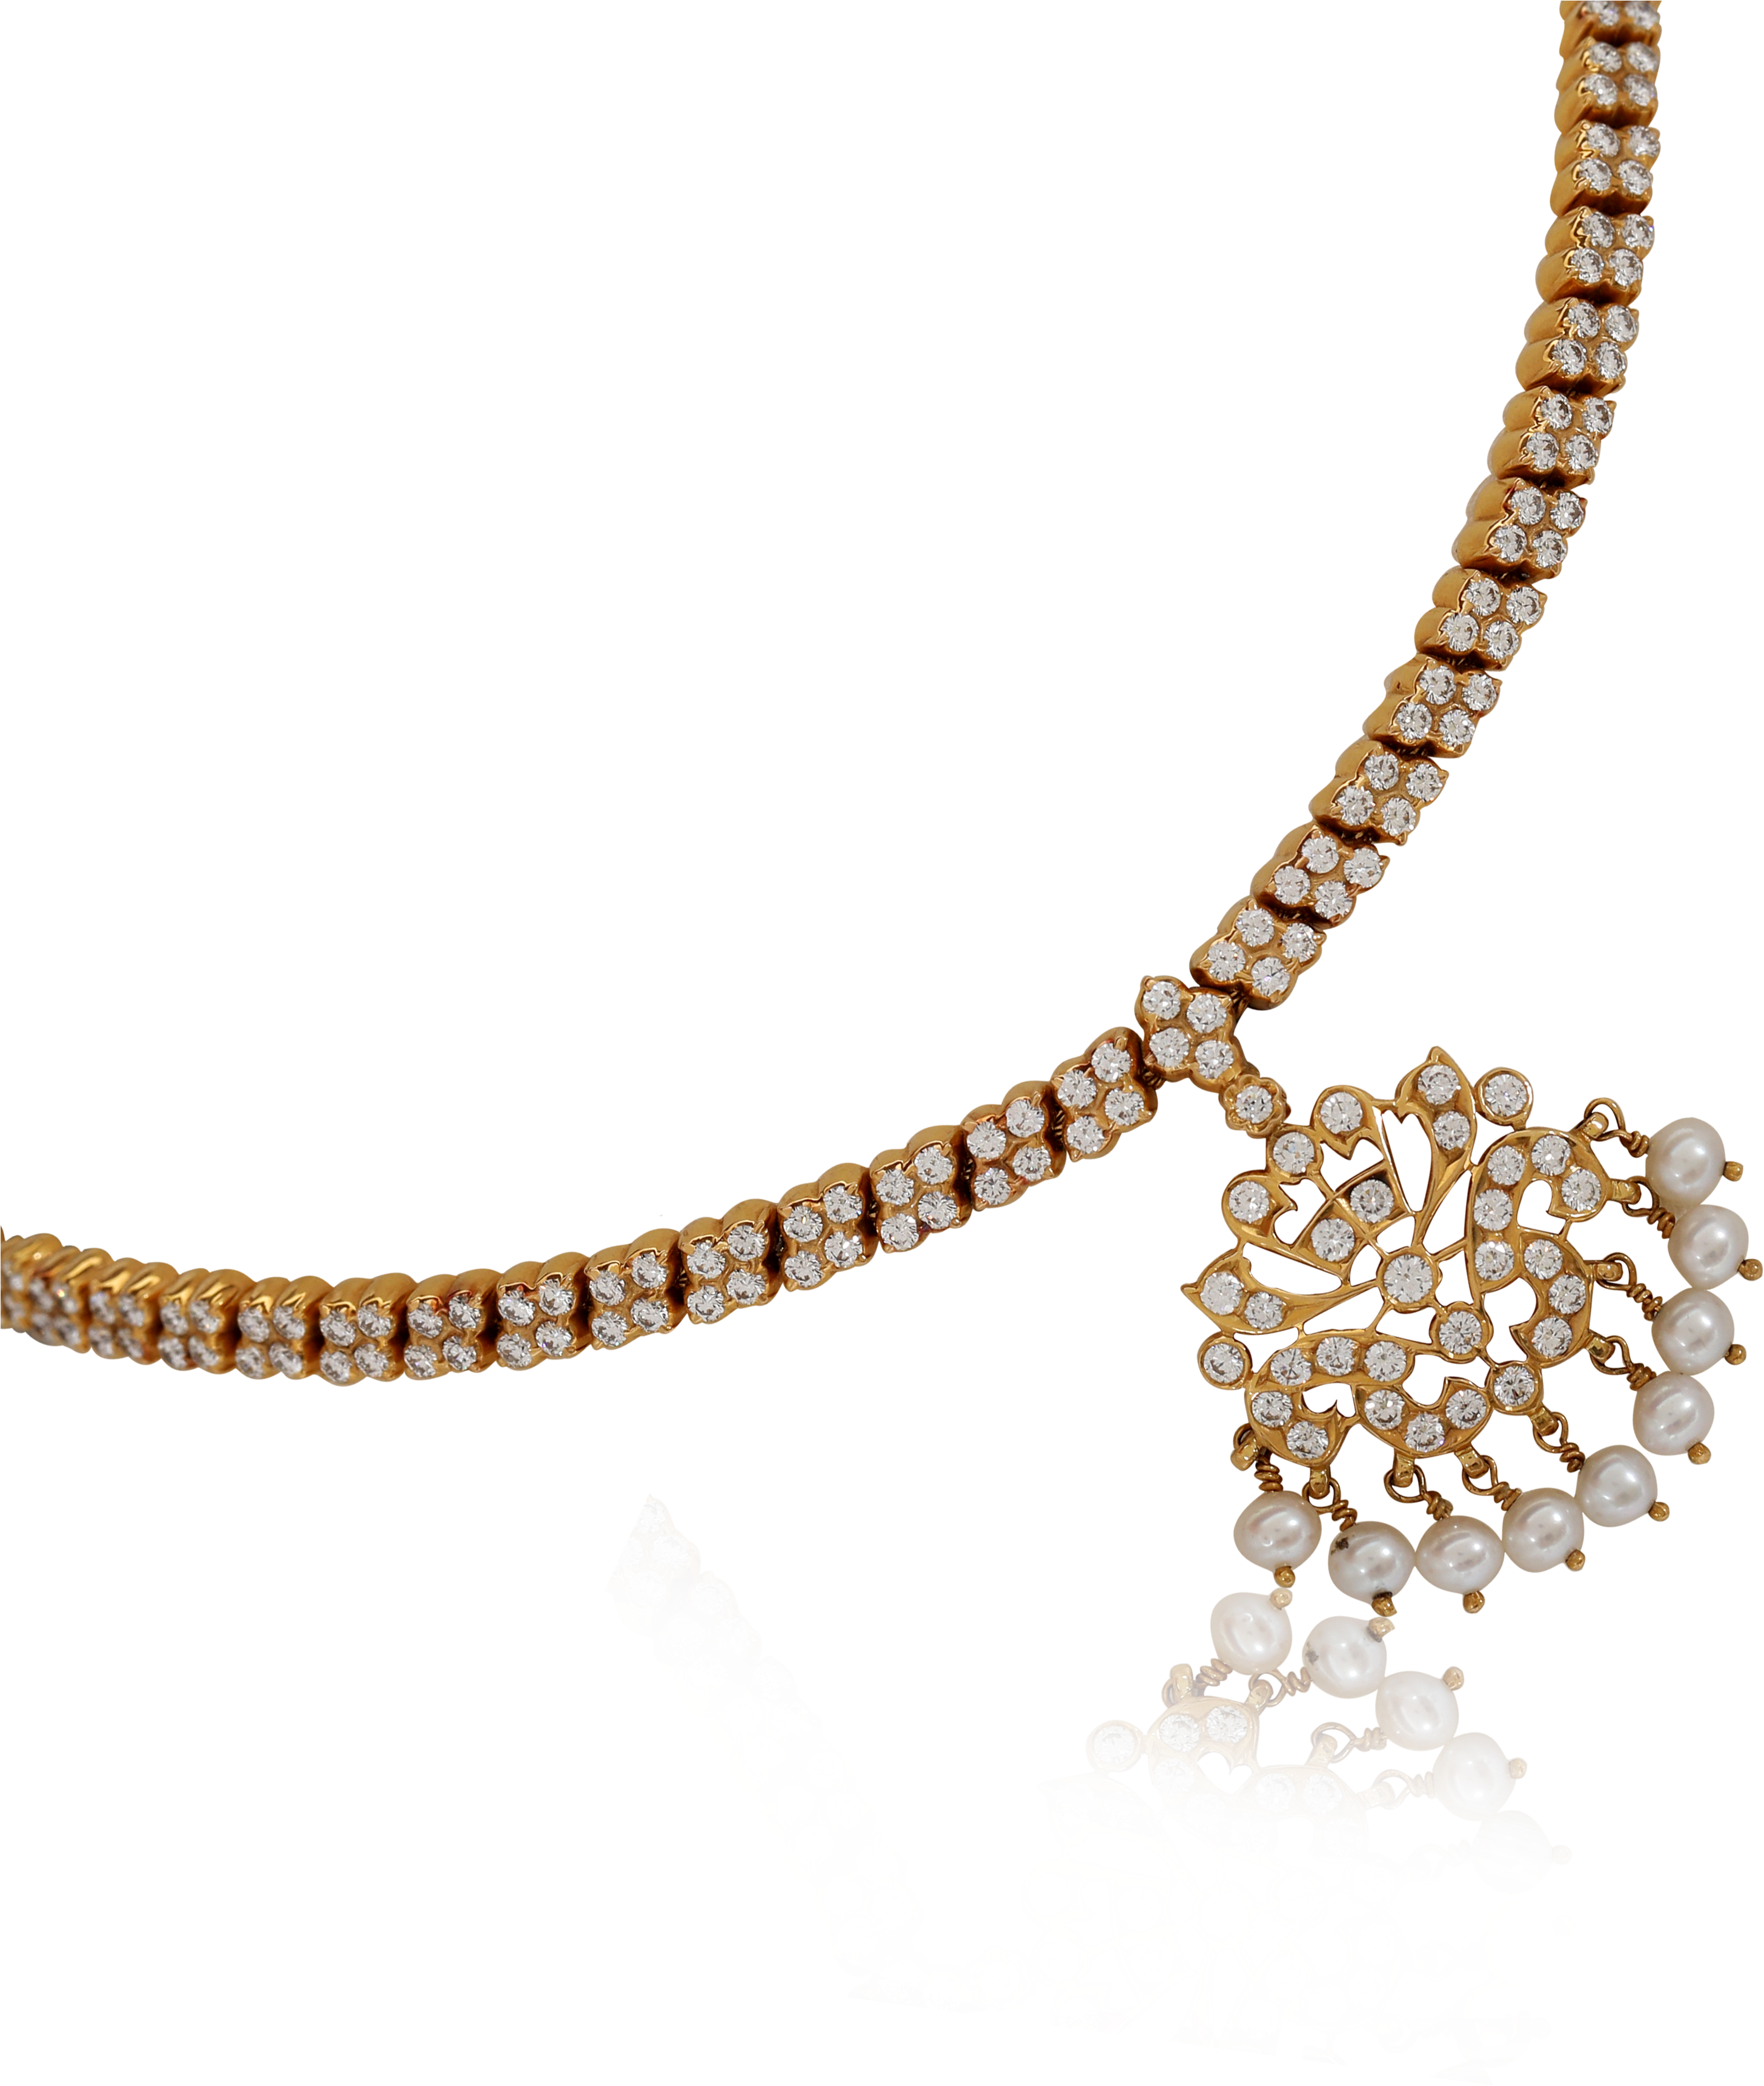 A Gold Necklace With Diamonds And Pearls